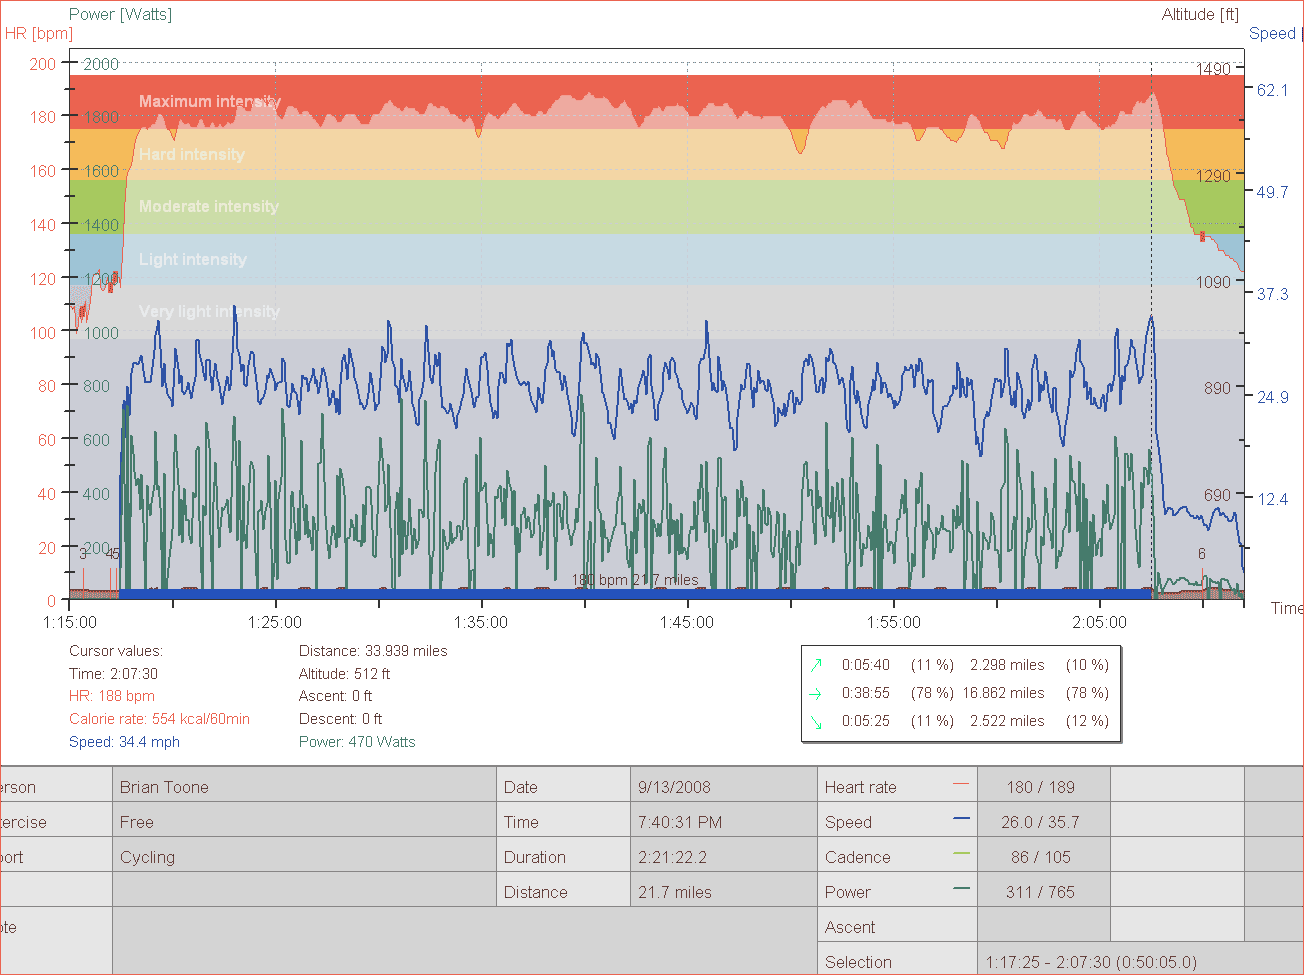 2008 Pepper Place Criterium Heartrate and Power data